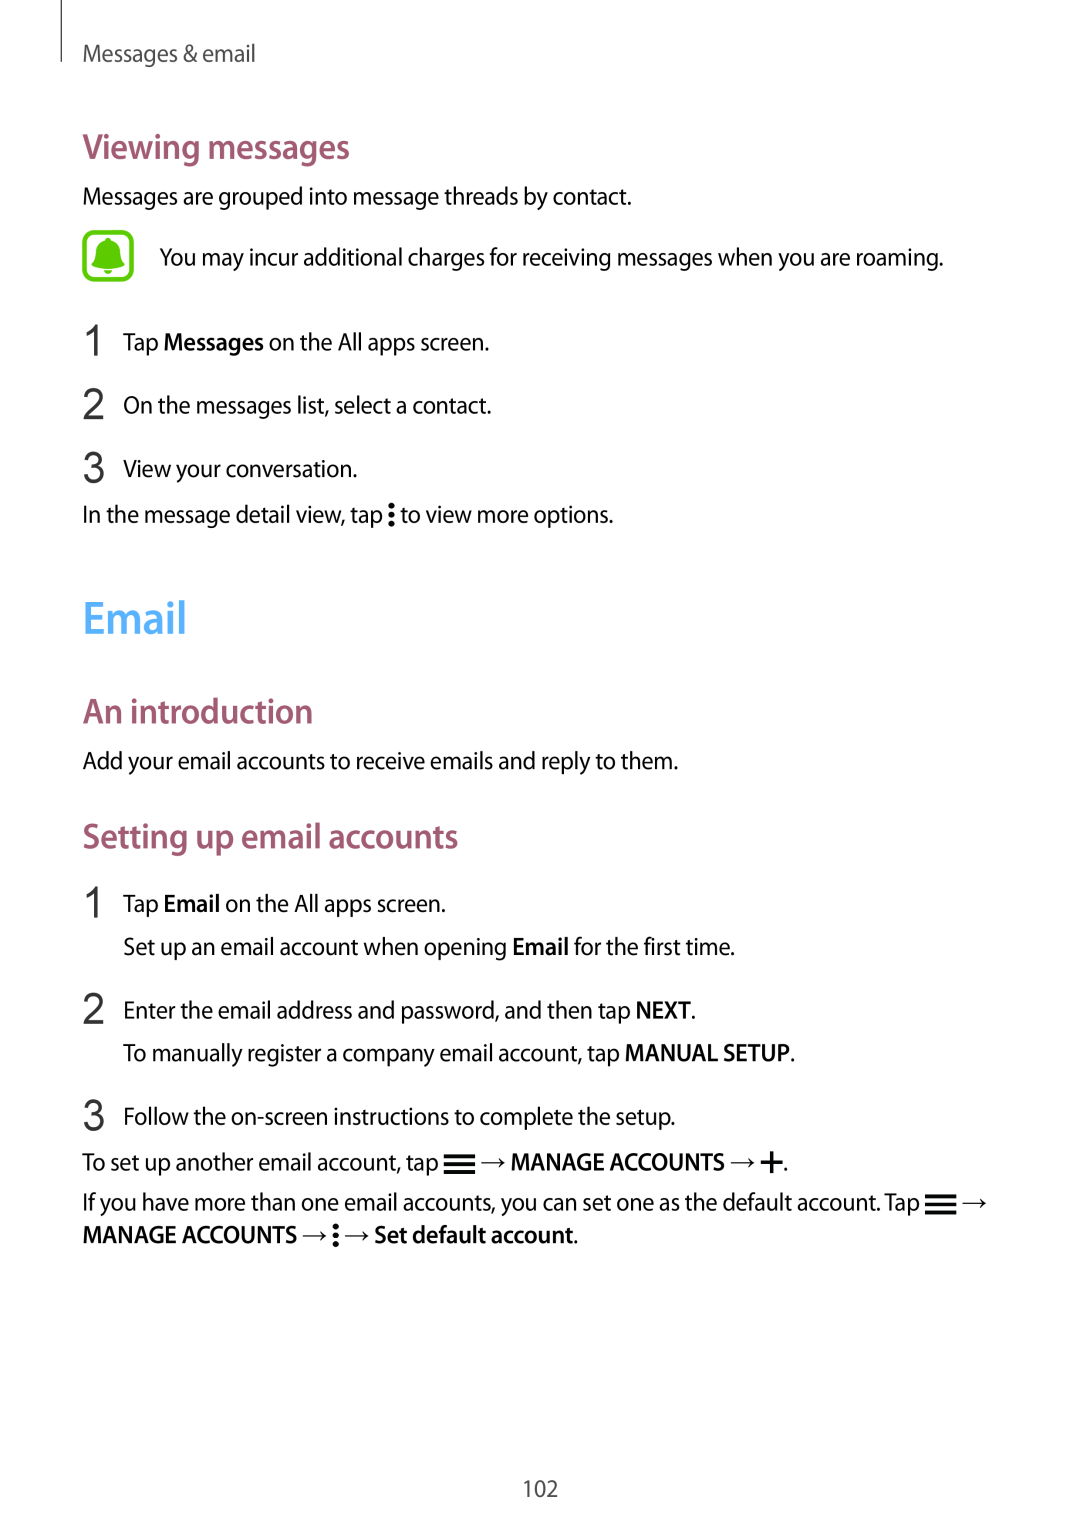 Samsung SM-N915FZKYDBT manual Email, Viewing messages, Setting up email accounts, Messages & email, An introduction 